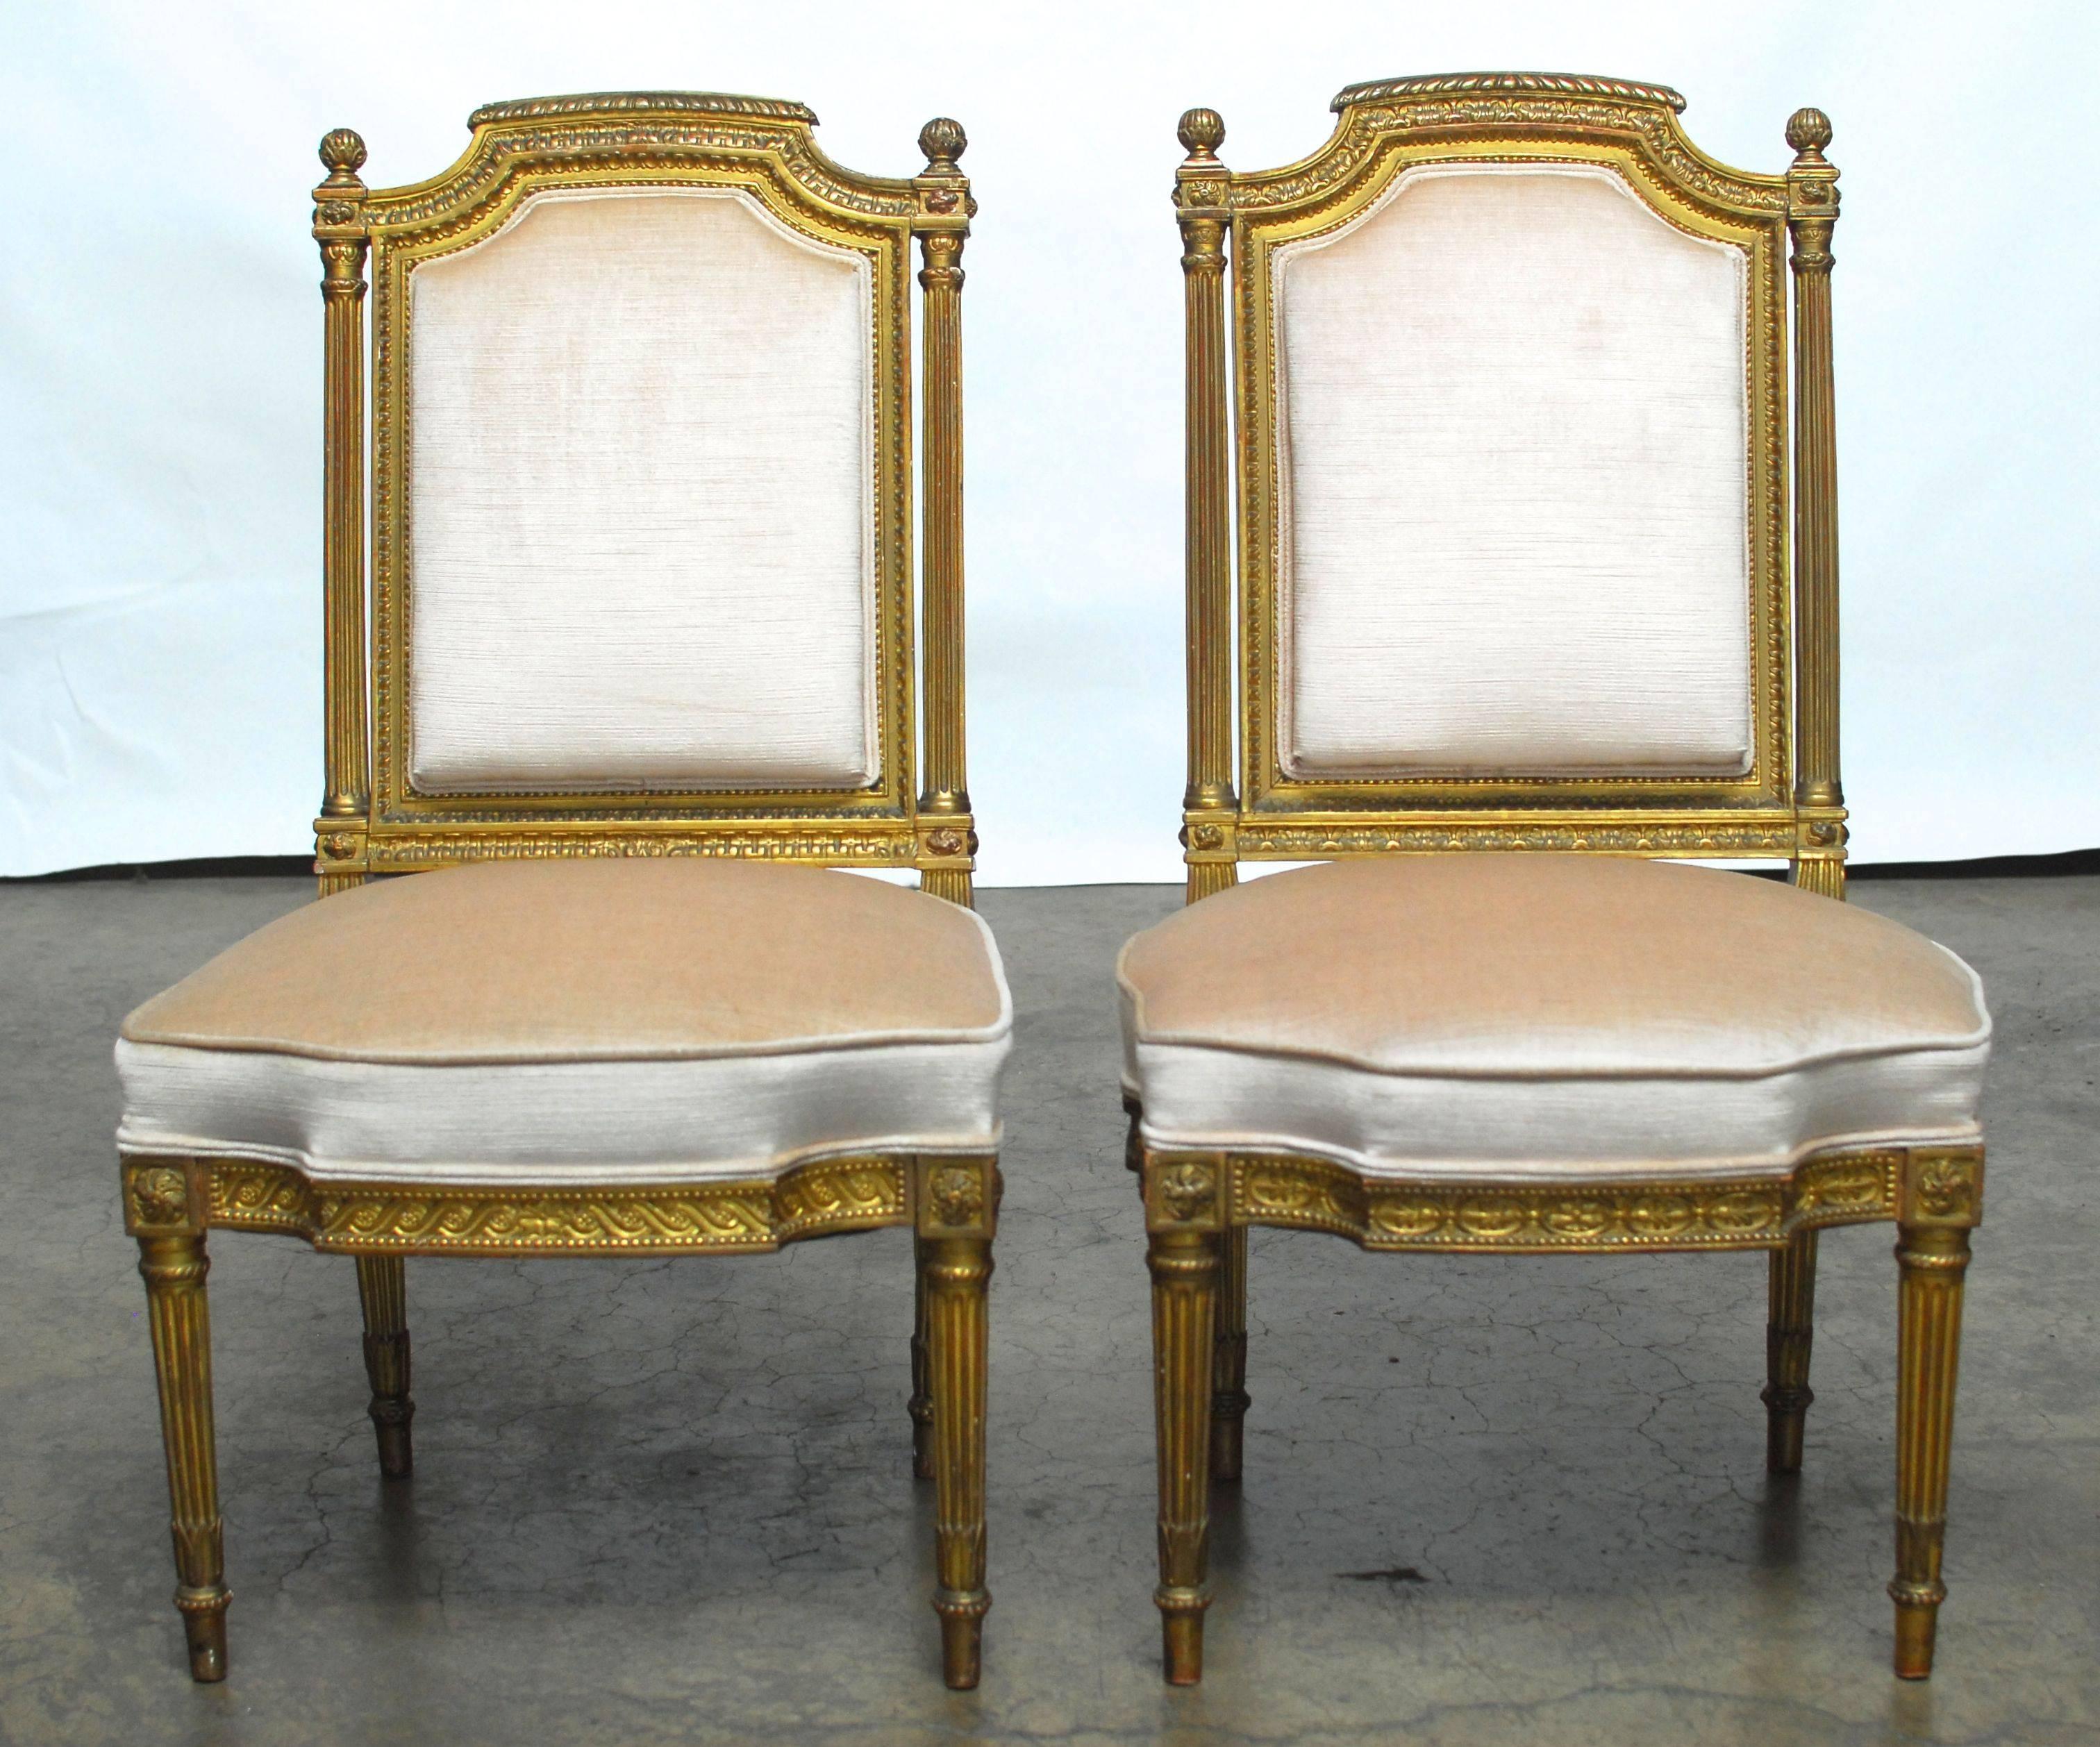 Stunning pair of French Louis XVI chairs featuring thick, giltwood frames. Fluted supports decorate the back with a shaped crest rail and round acorn finials. The seats have a bowed front apron with tall cushions and double welt border. Newly